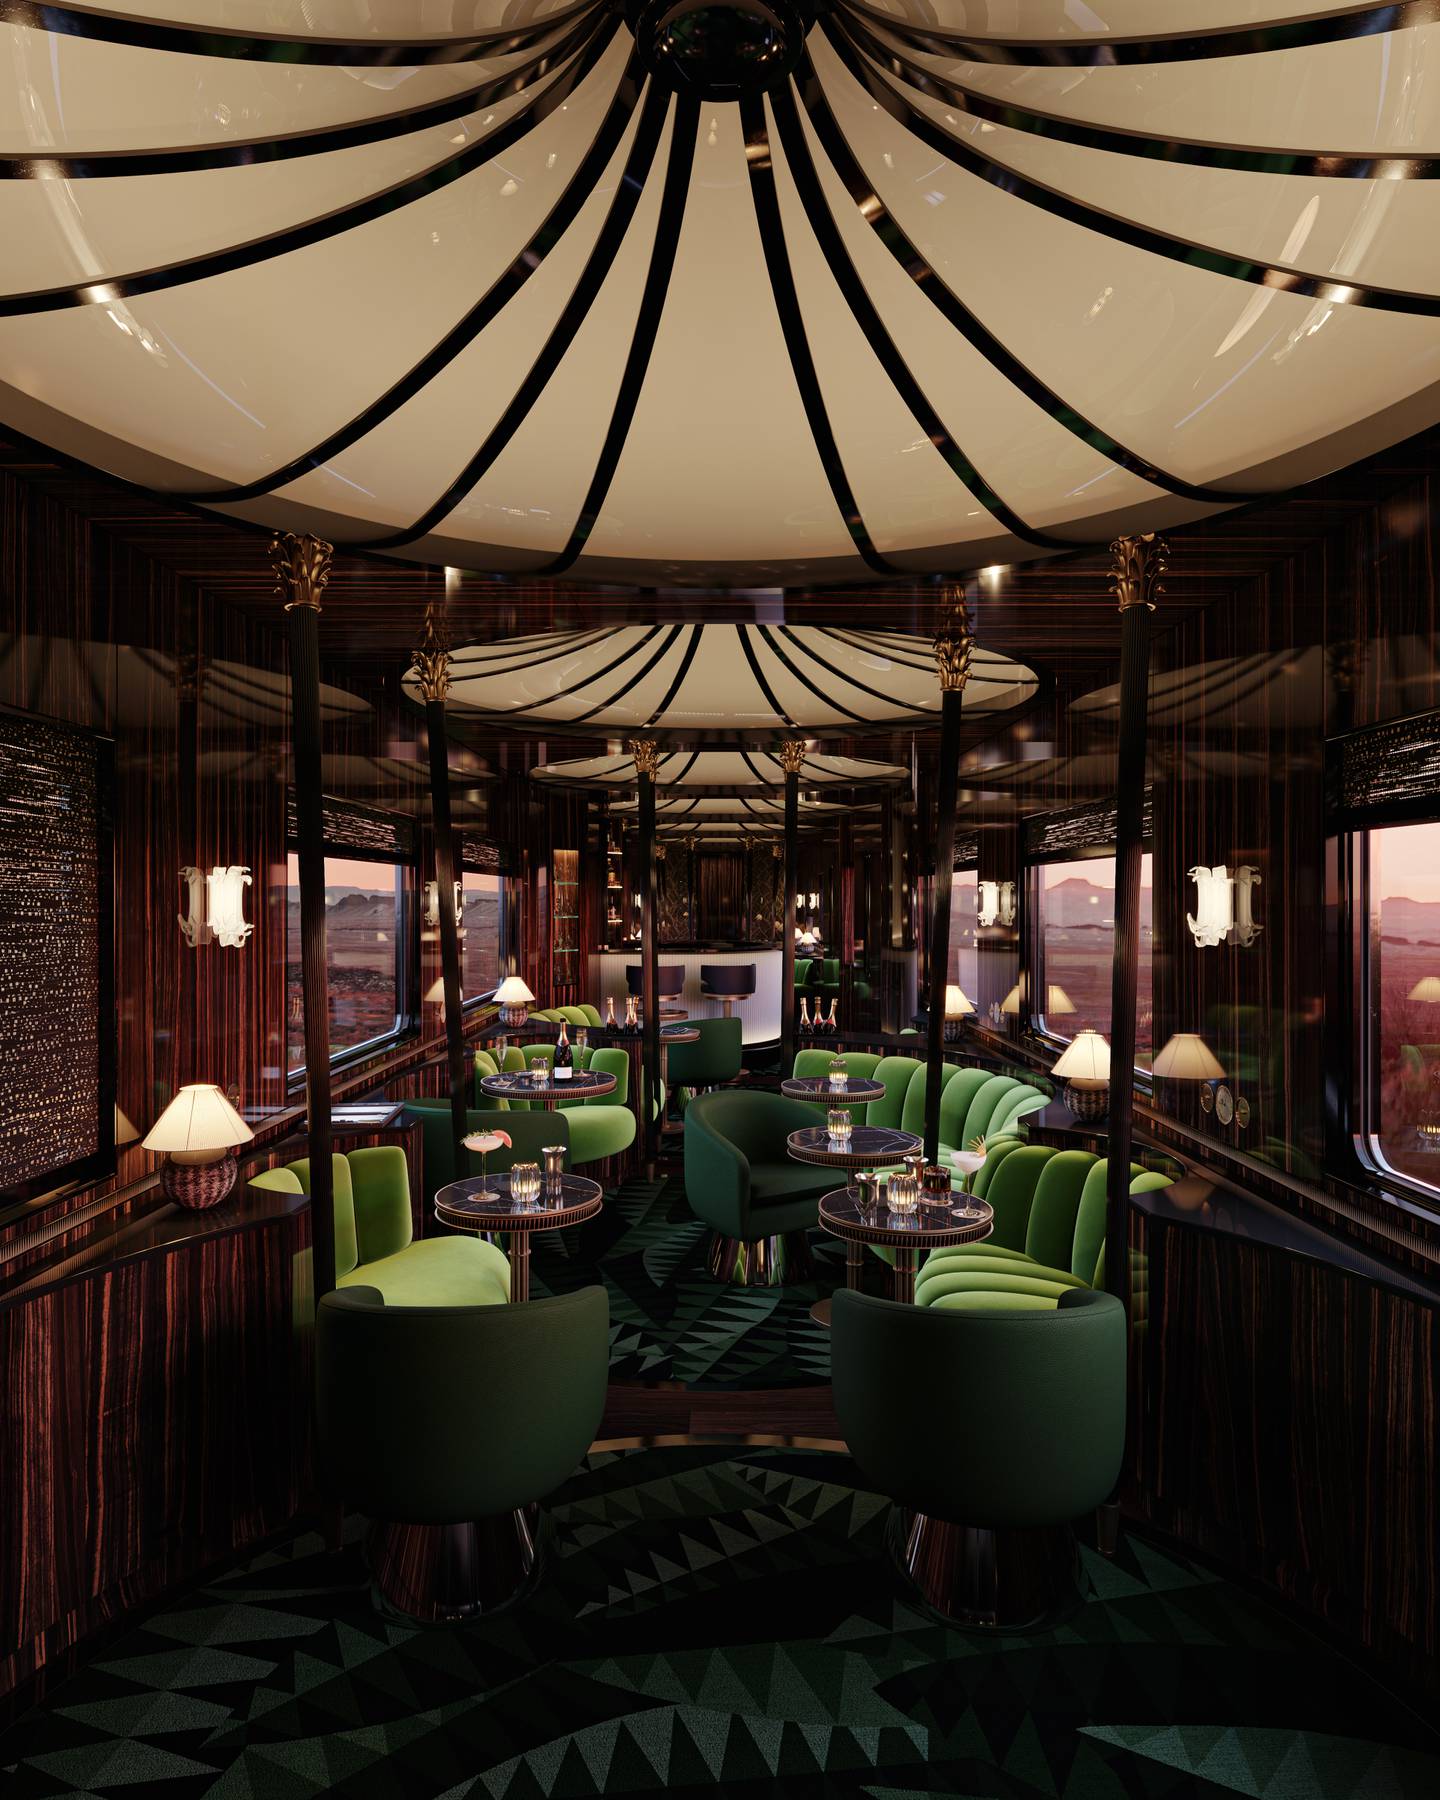 Reimagined interiors on the Orient Express champion French craftmanship. Photo: Accor